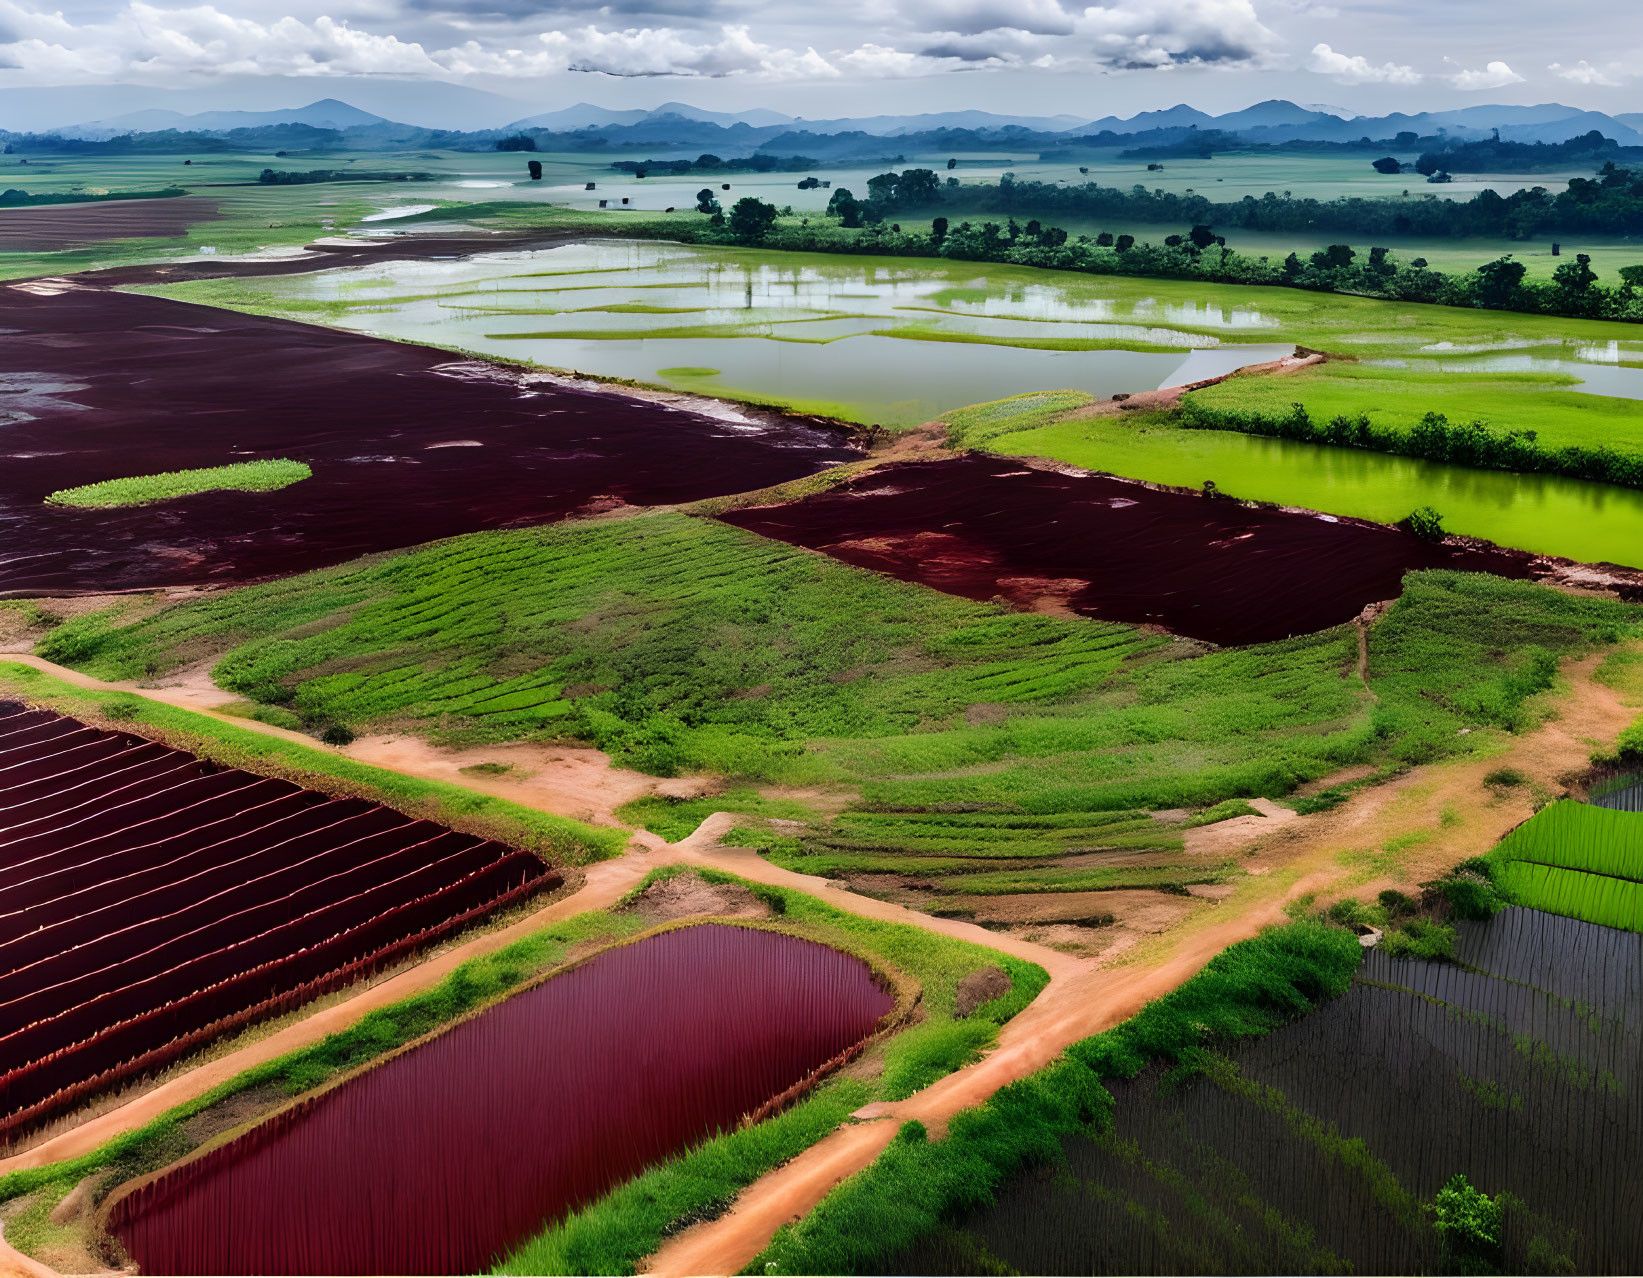 Colorful Aerial View of Flooded Agricultural Fields in Green, Brown, and Red